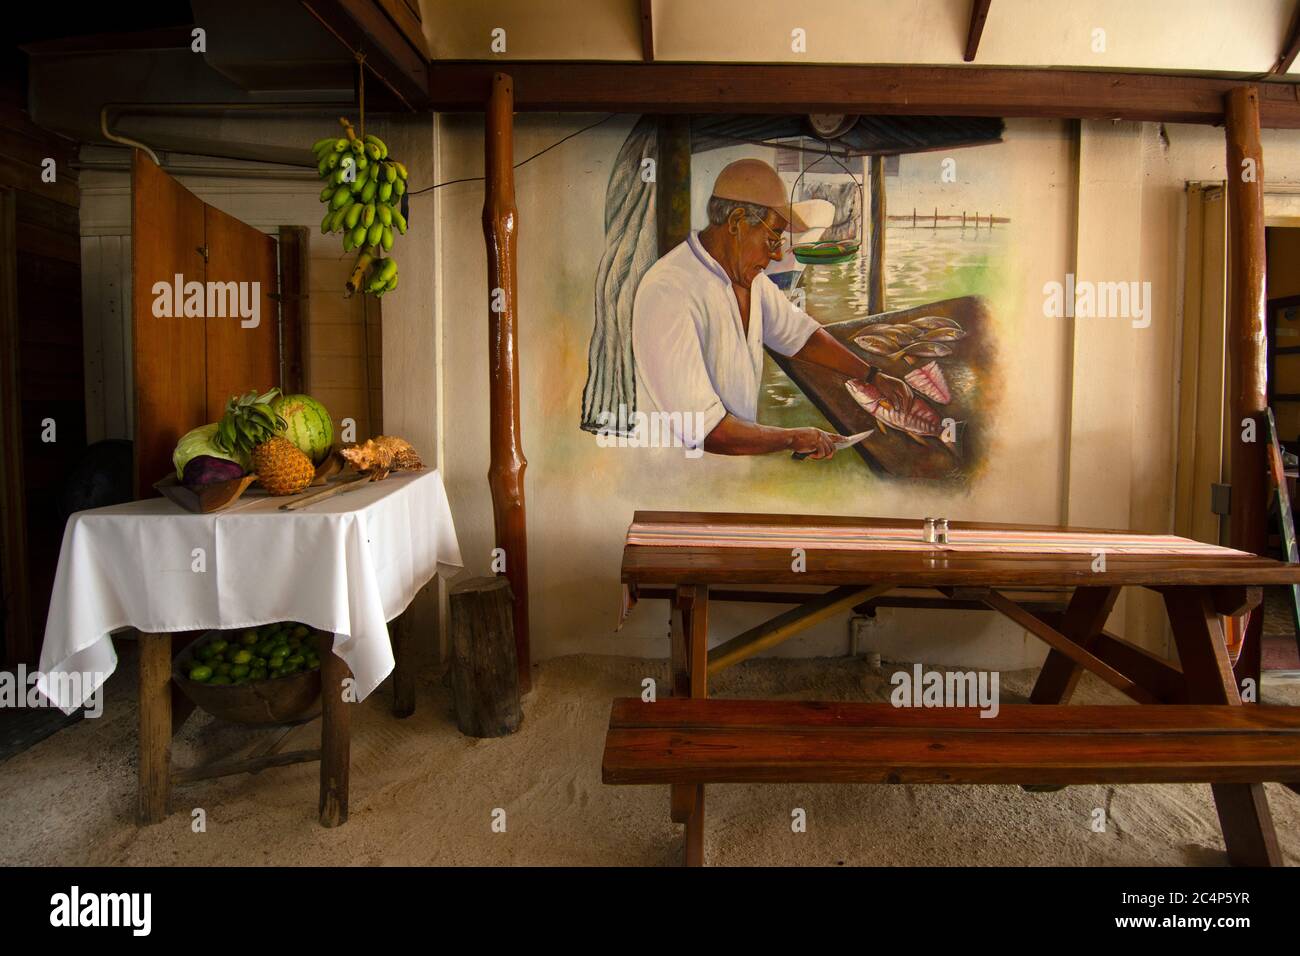 Table with fruits and painting with a typical Belizean atmosphere inside the El Fogon restaurant, San Pedro, Ambergris Caye, Belize Stock Photo